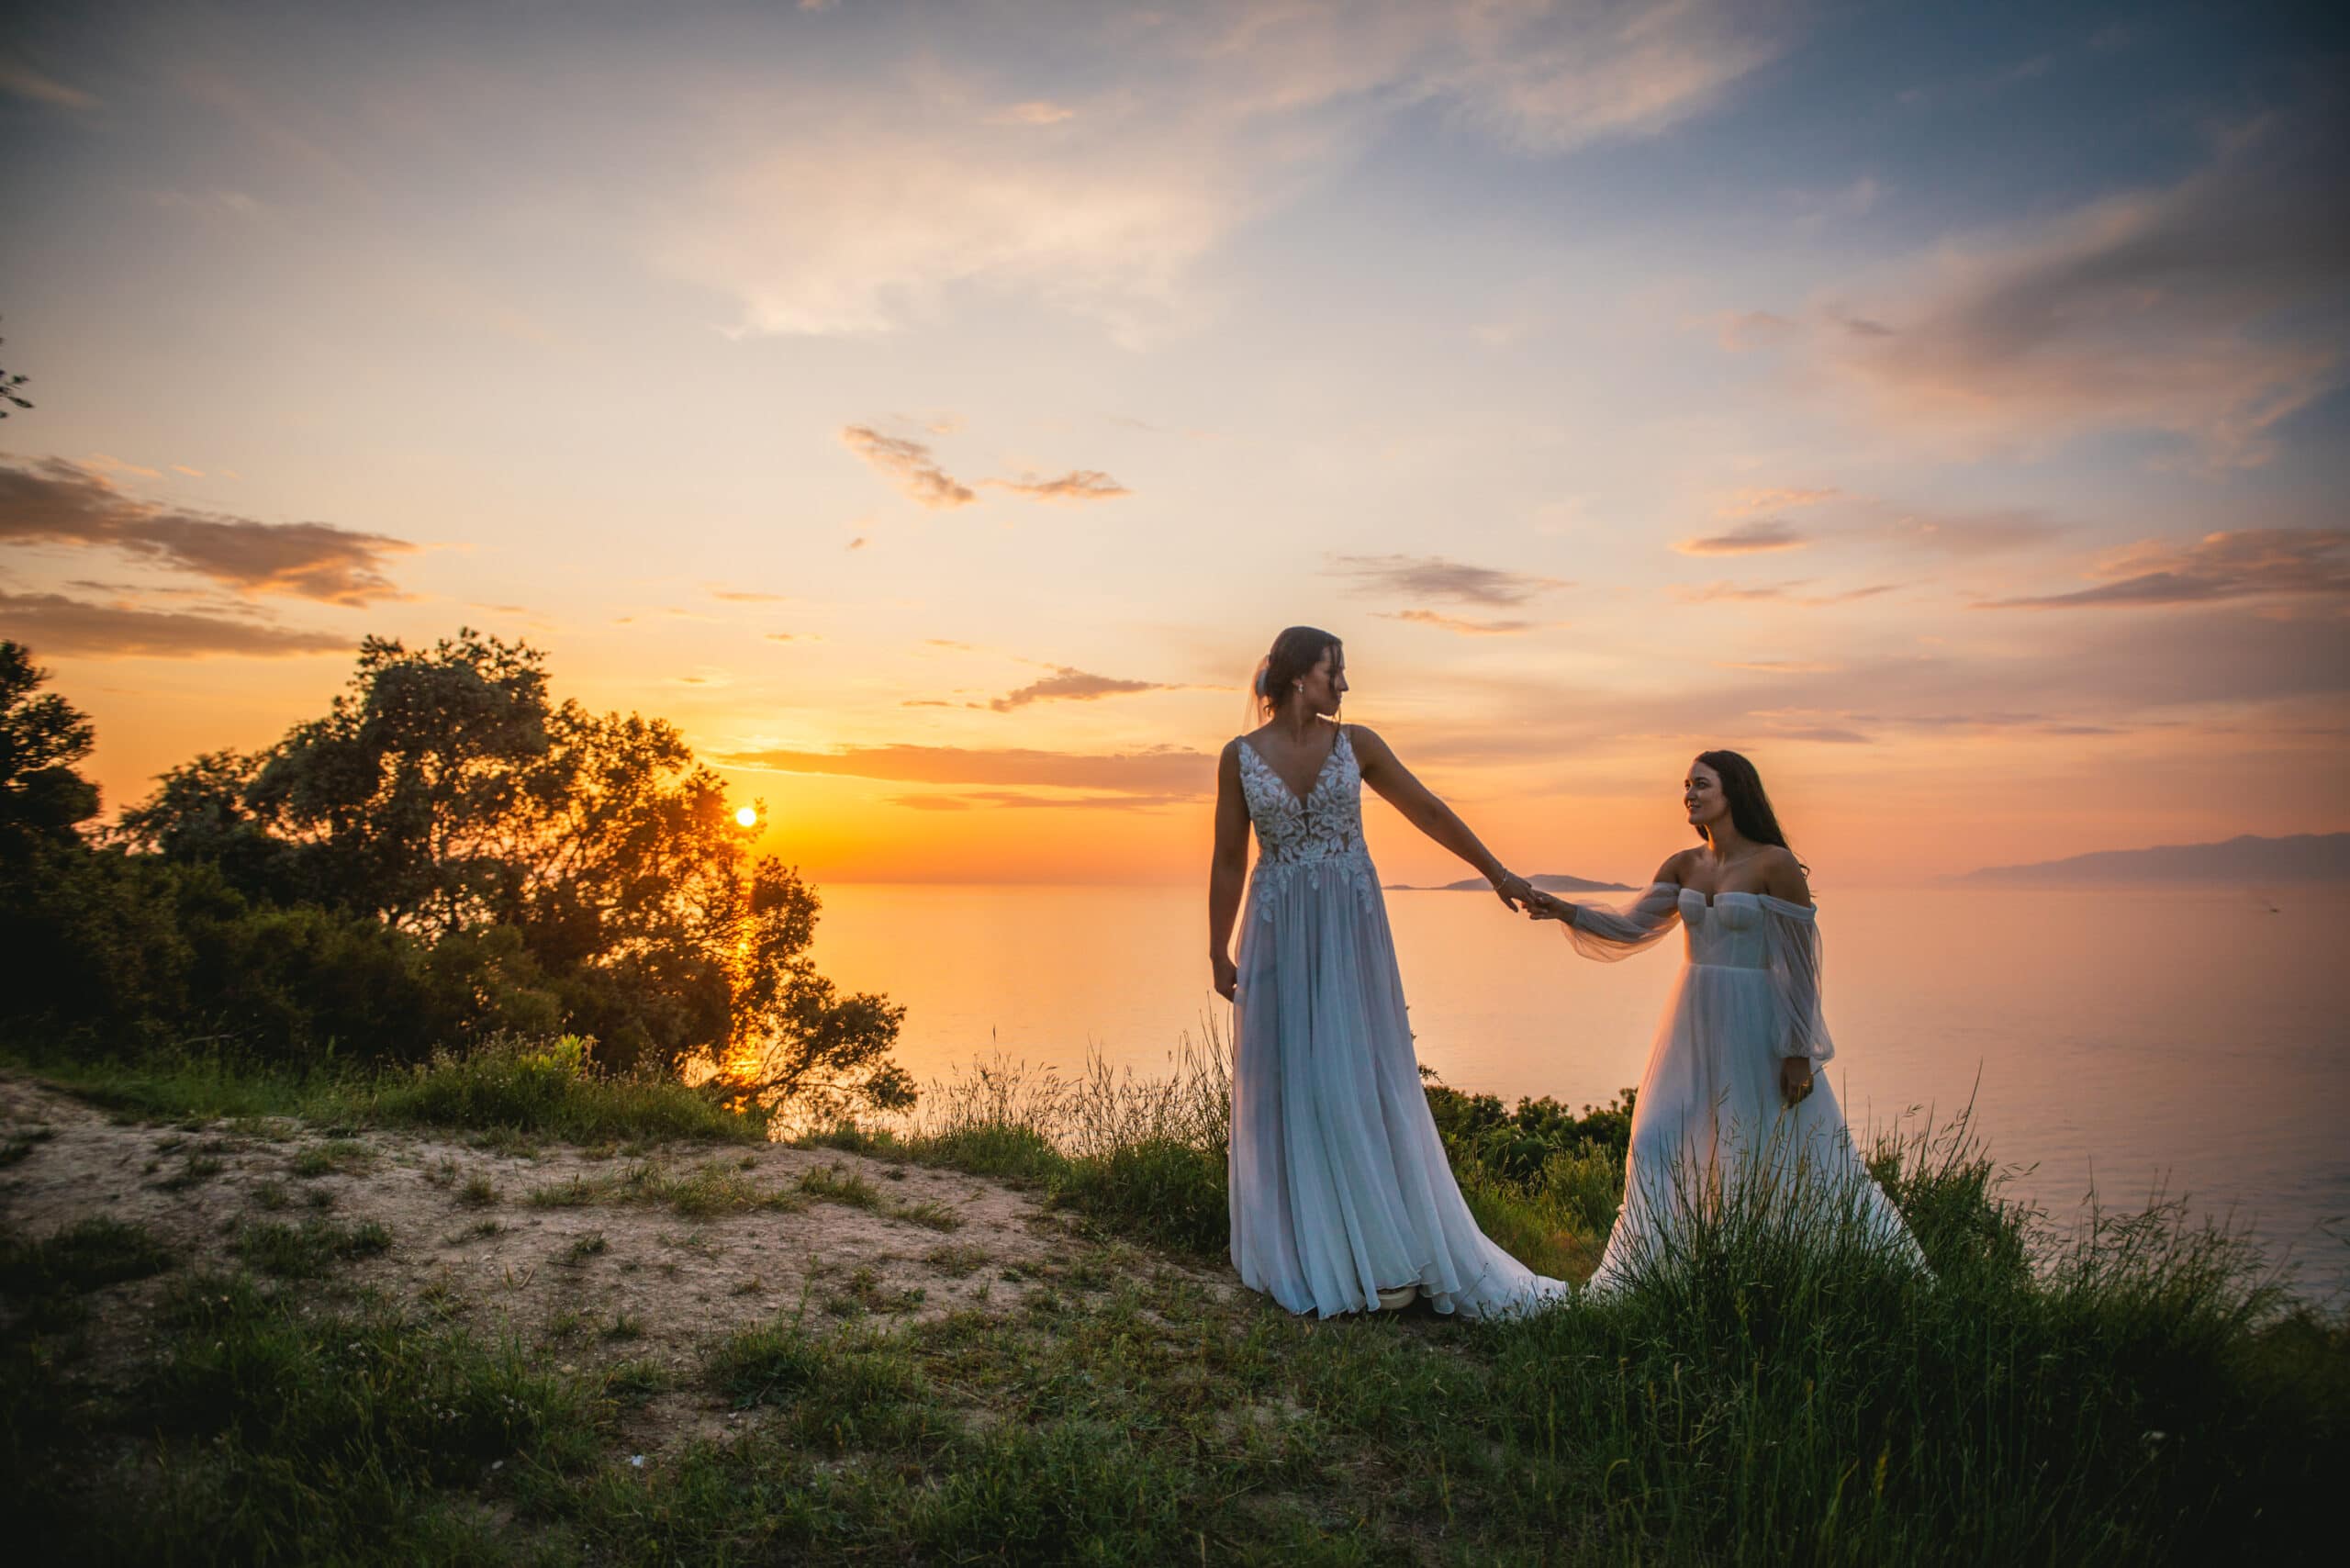 Brides walking along the cliff's edge during sunset, love's journey in Corfu elopement.